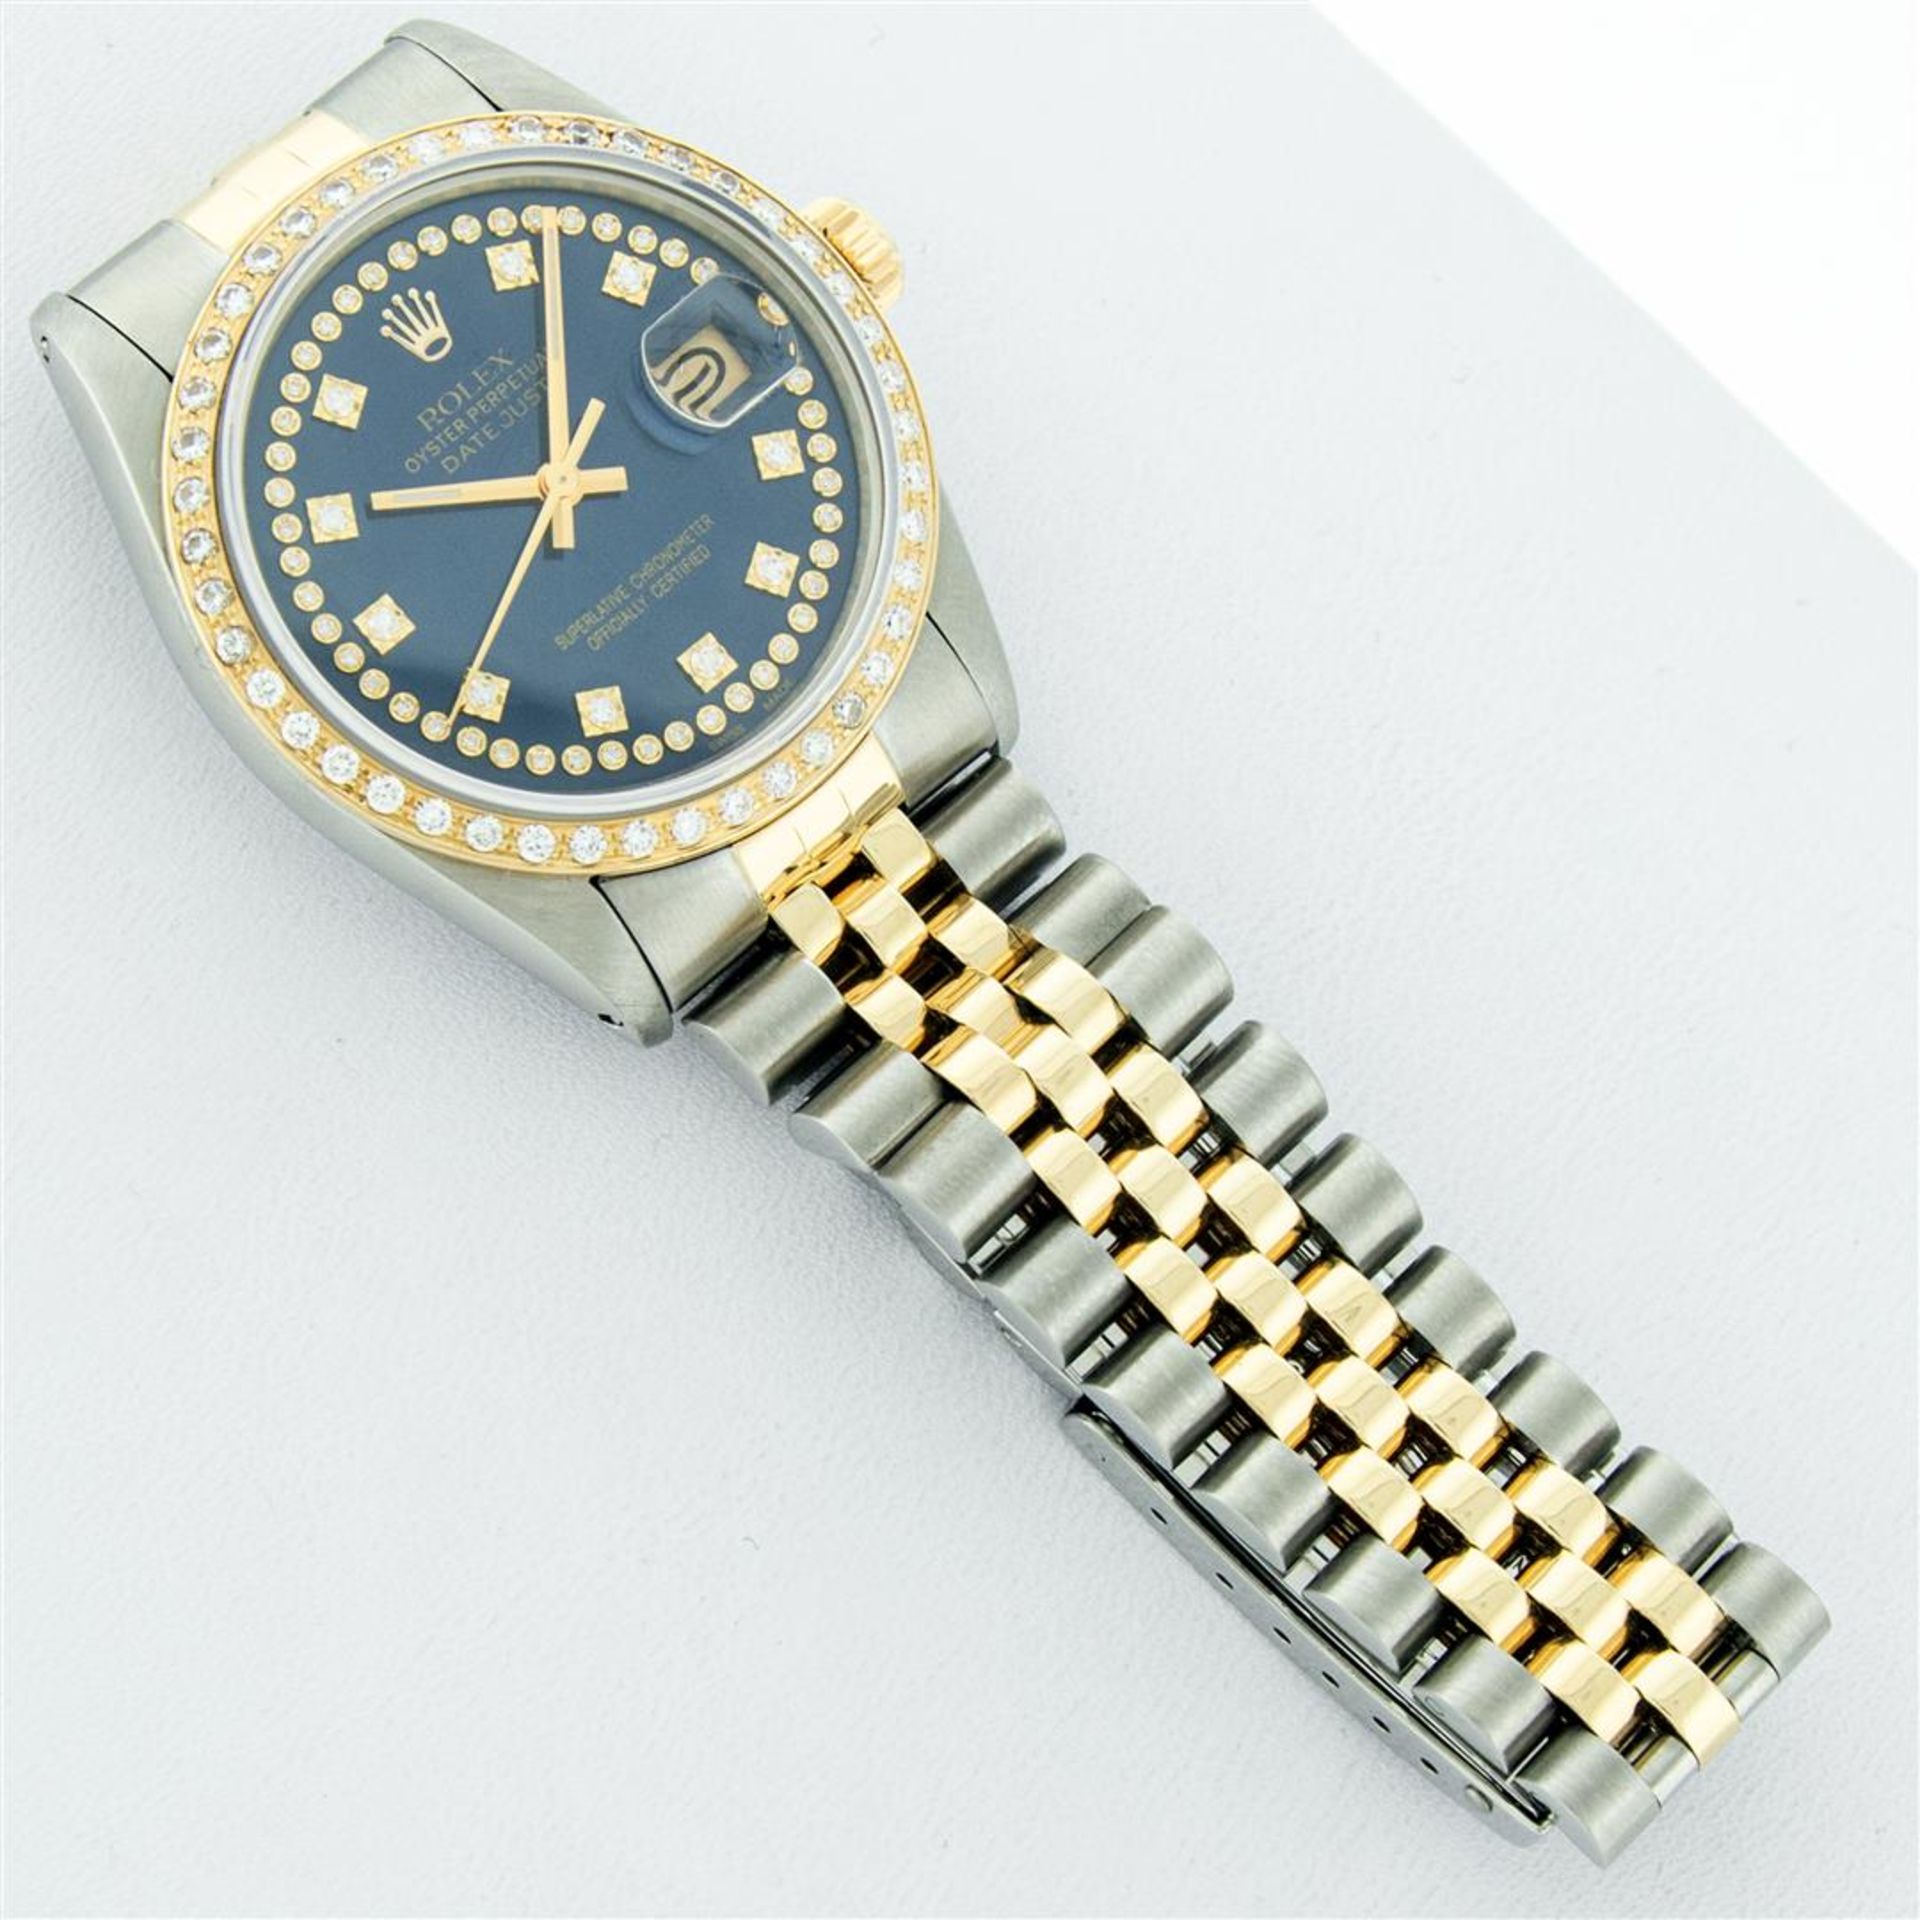 Rolex Mens 2 Tone Blue String VS Diamond Datejust Wristwatch Oyster Perpetual - Image 6 of 9